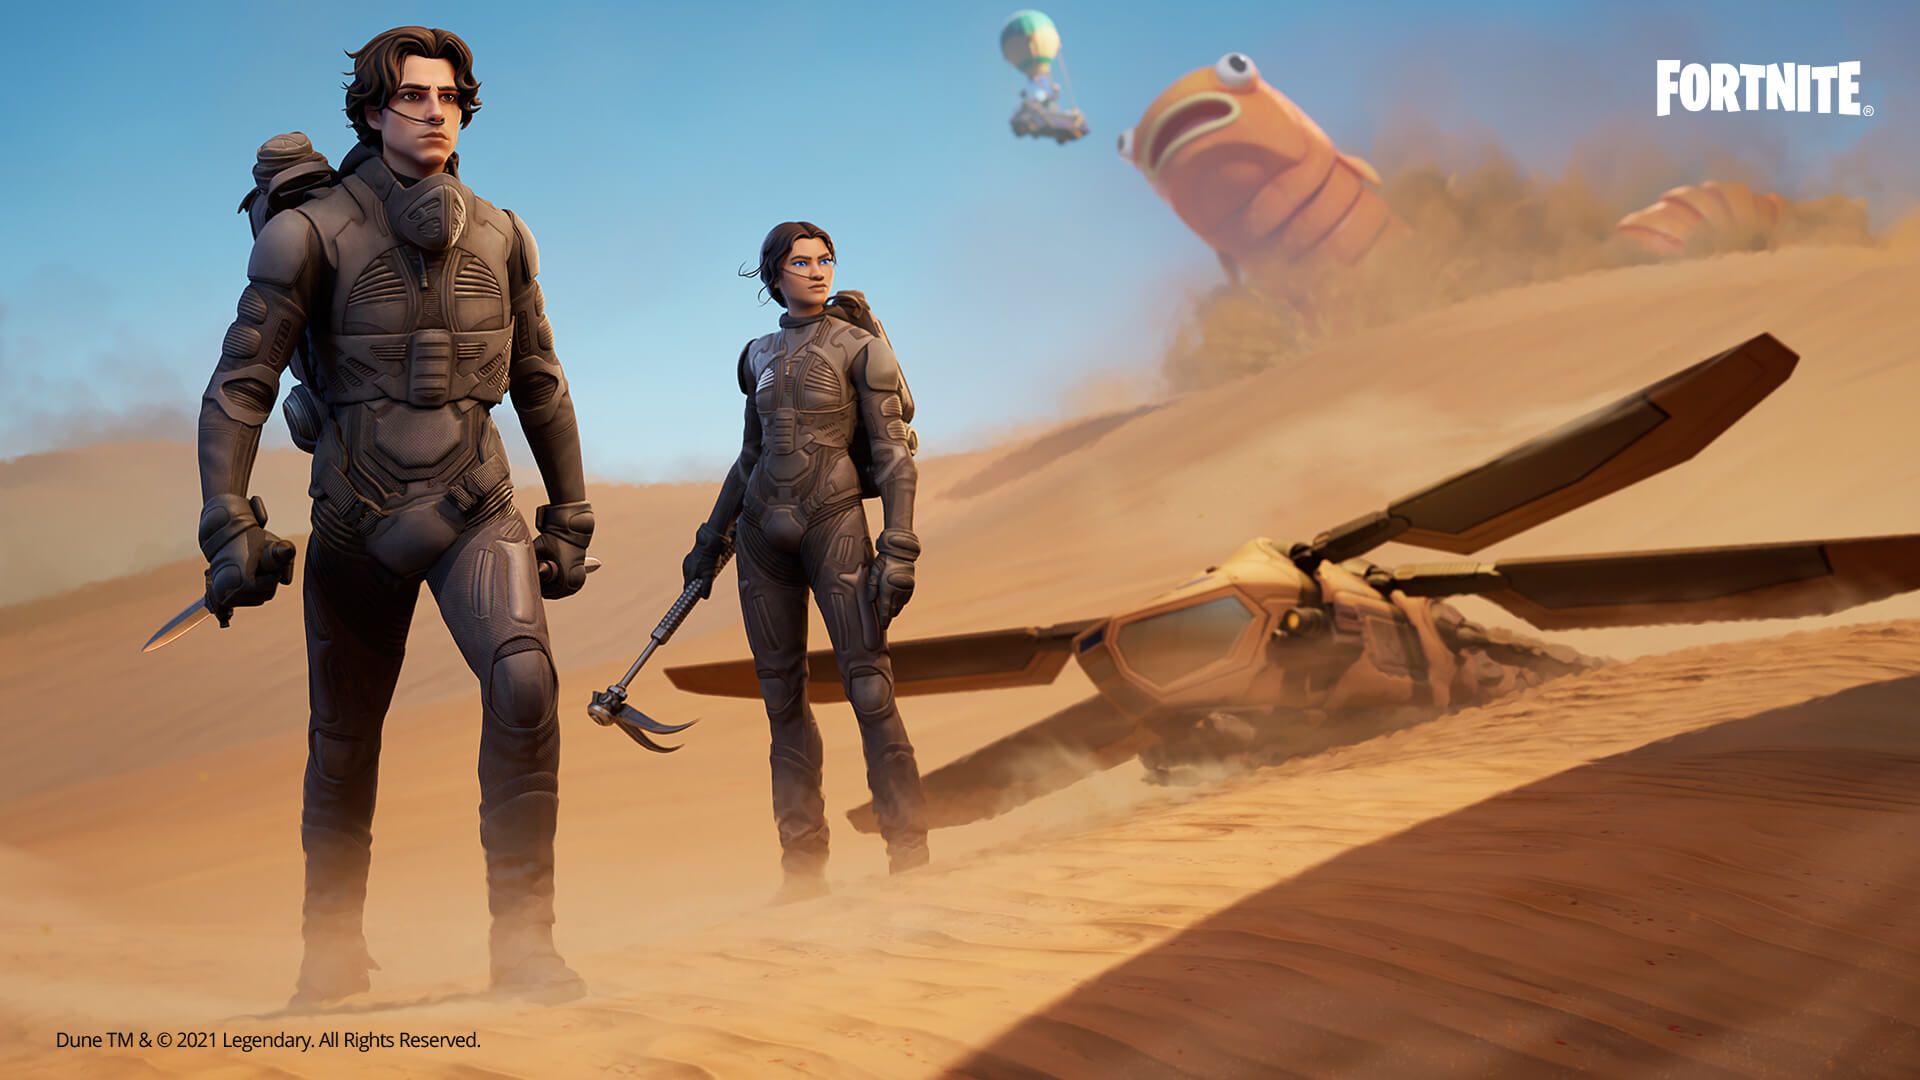 Dune Is In Fortnite So Why Do I Need To See It In Theatres